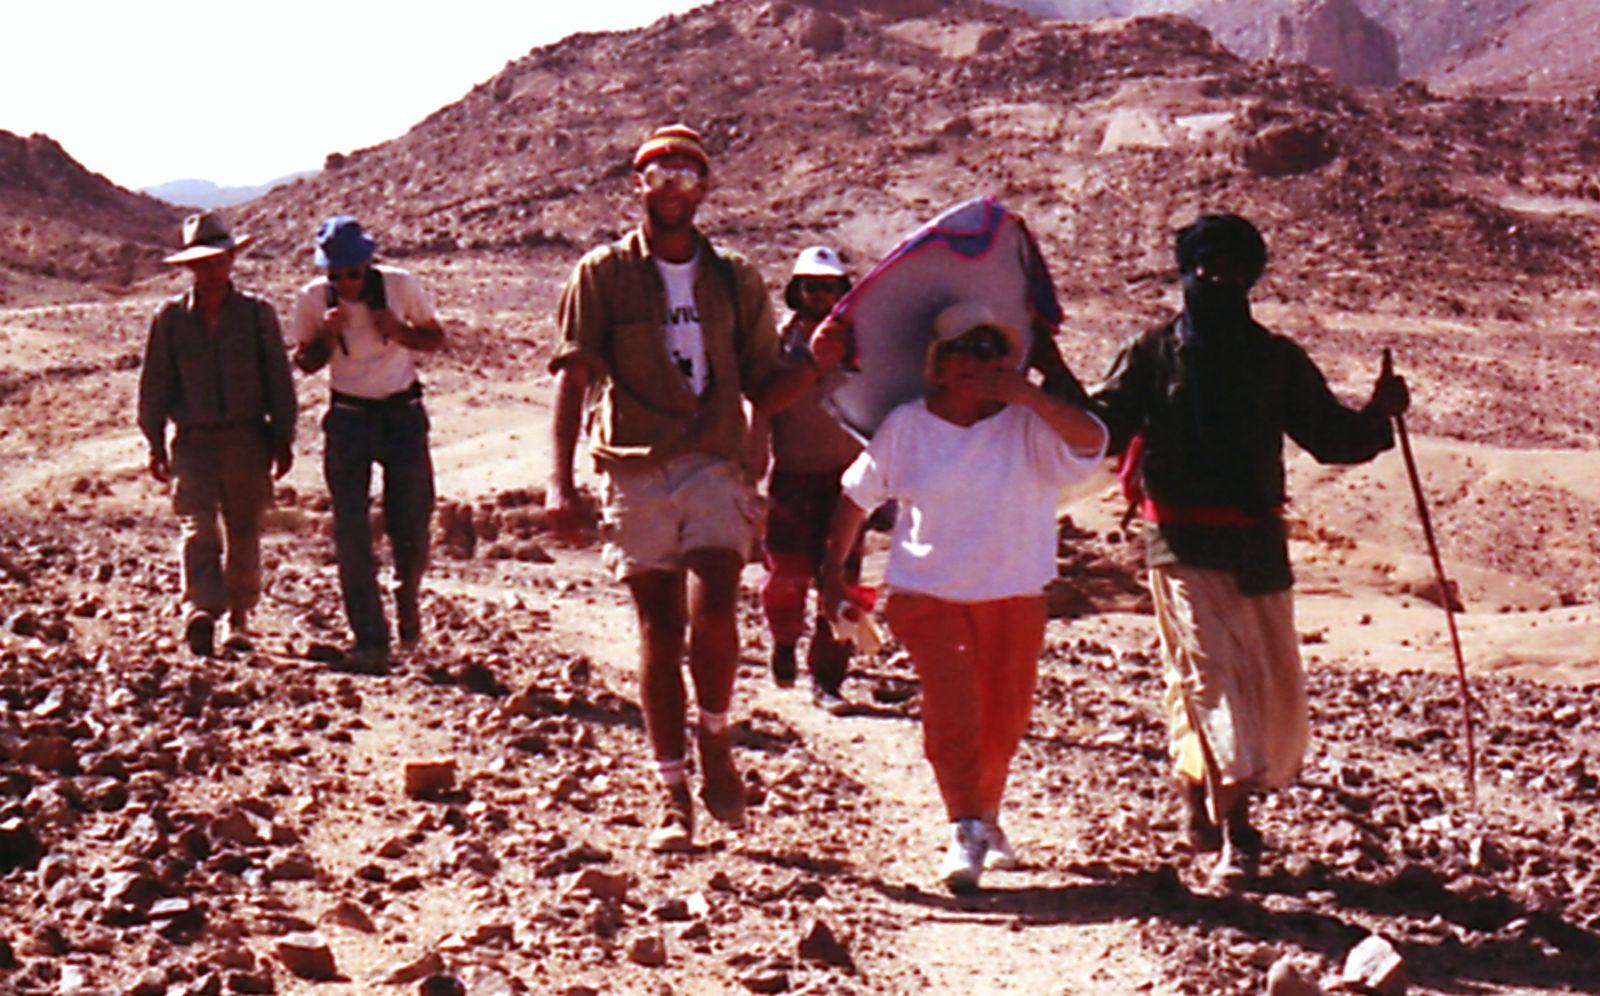 Janine Warnod, Queen of the Tassili, as we leave the plateau. Last slide.